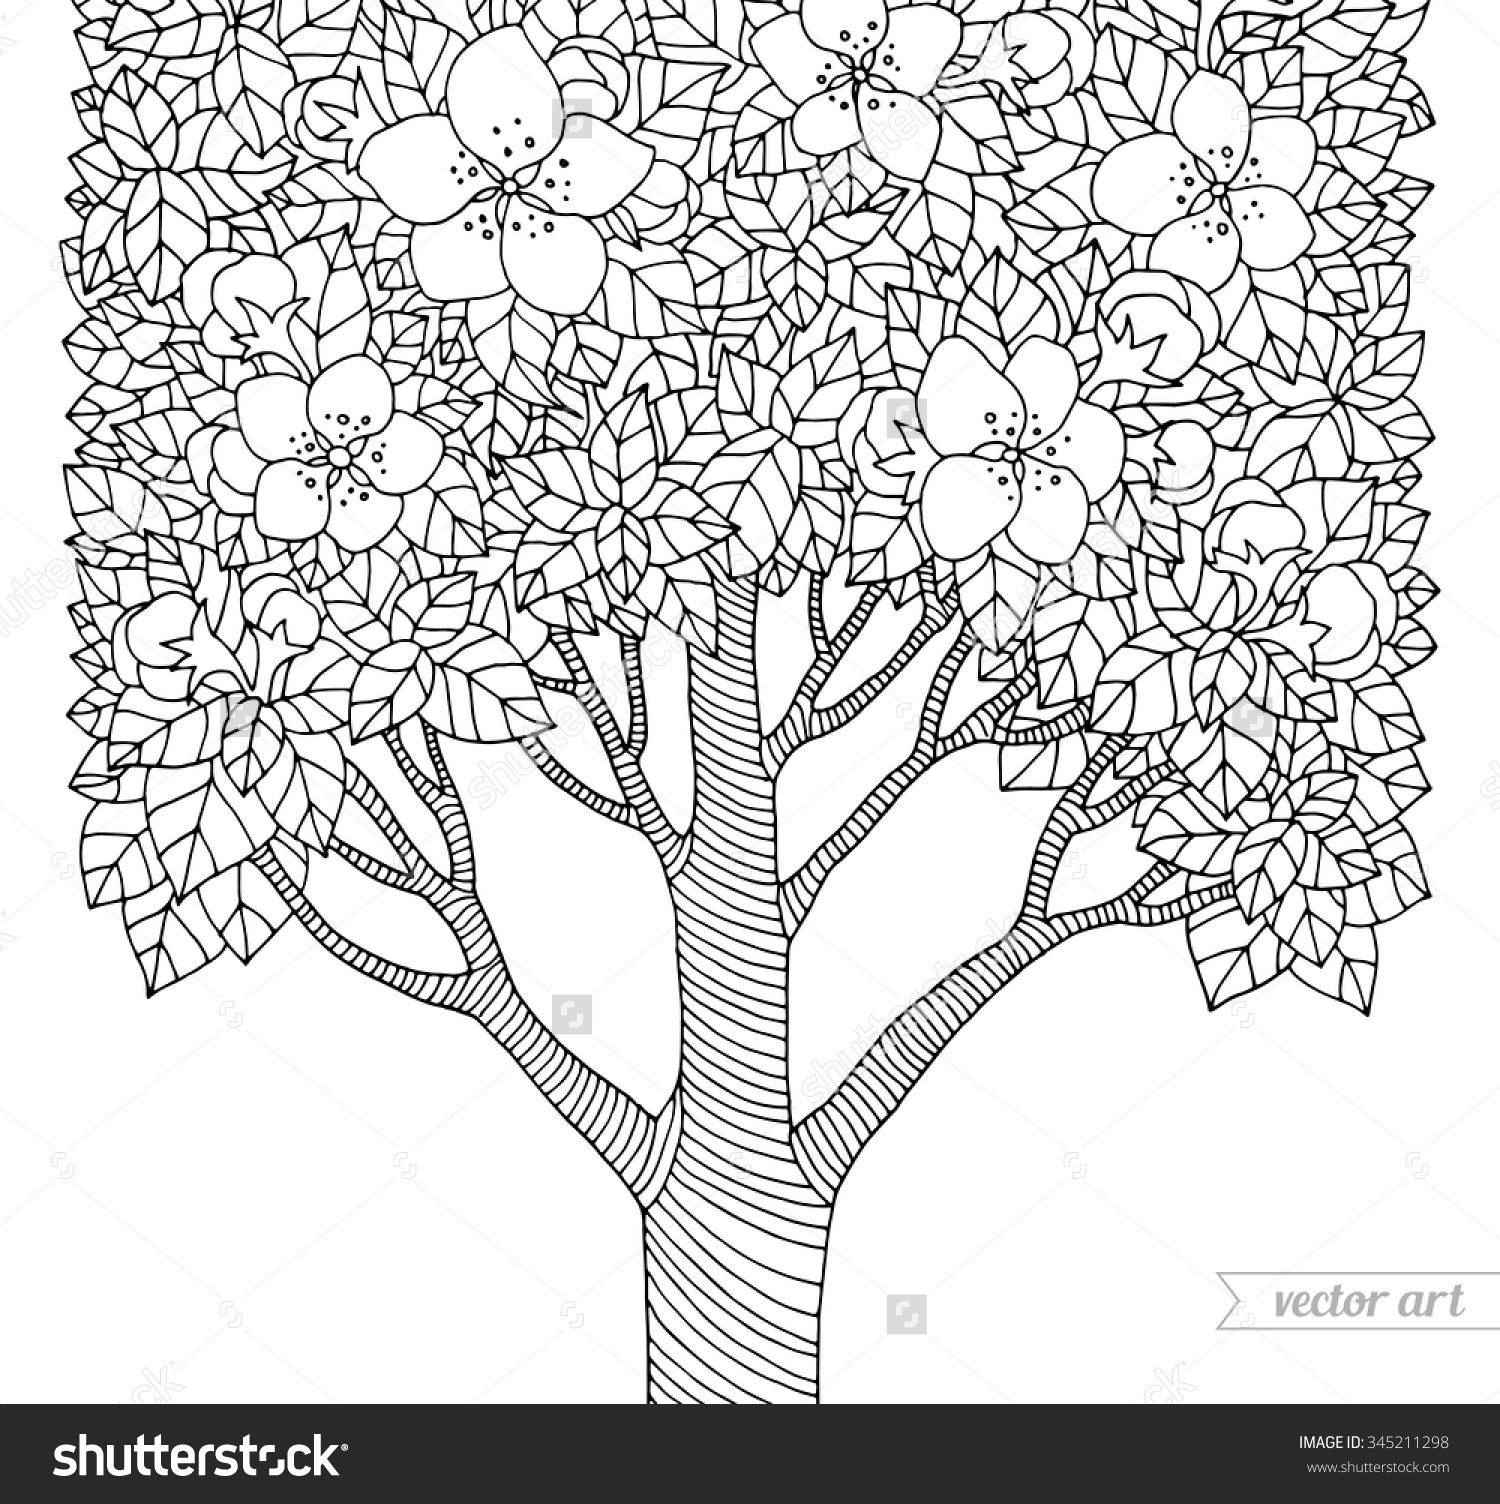 Dogwood Tree Coloring Page at GetColorings.com | Free printable